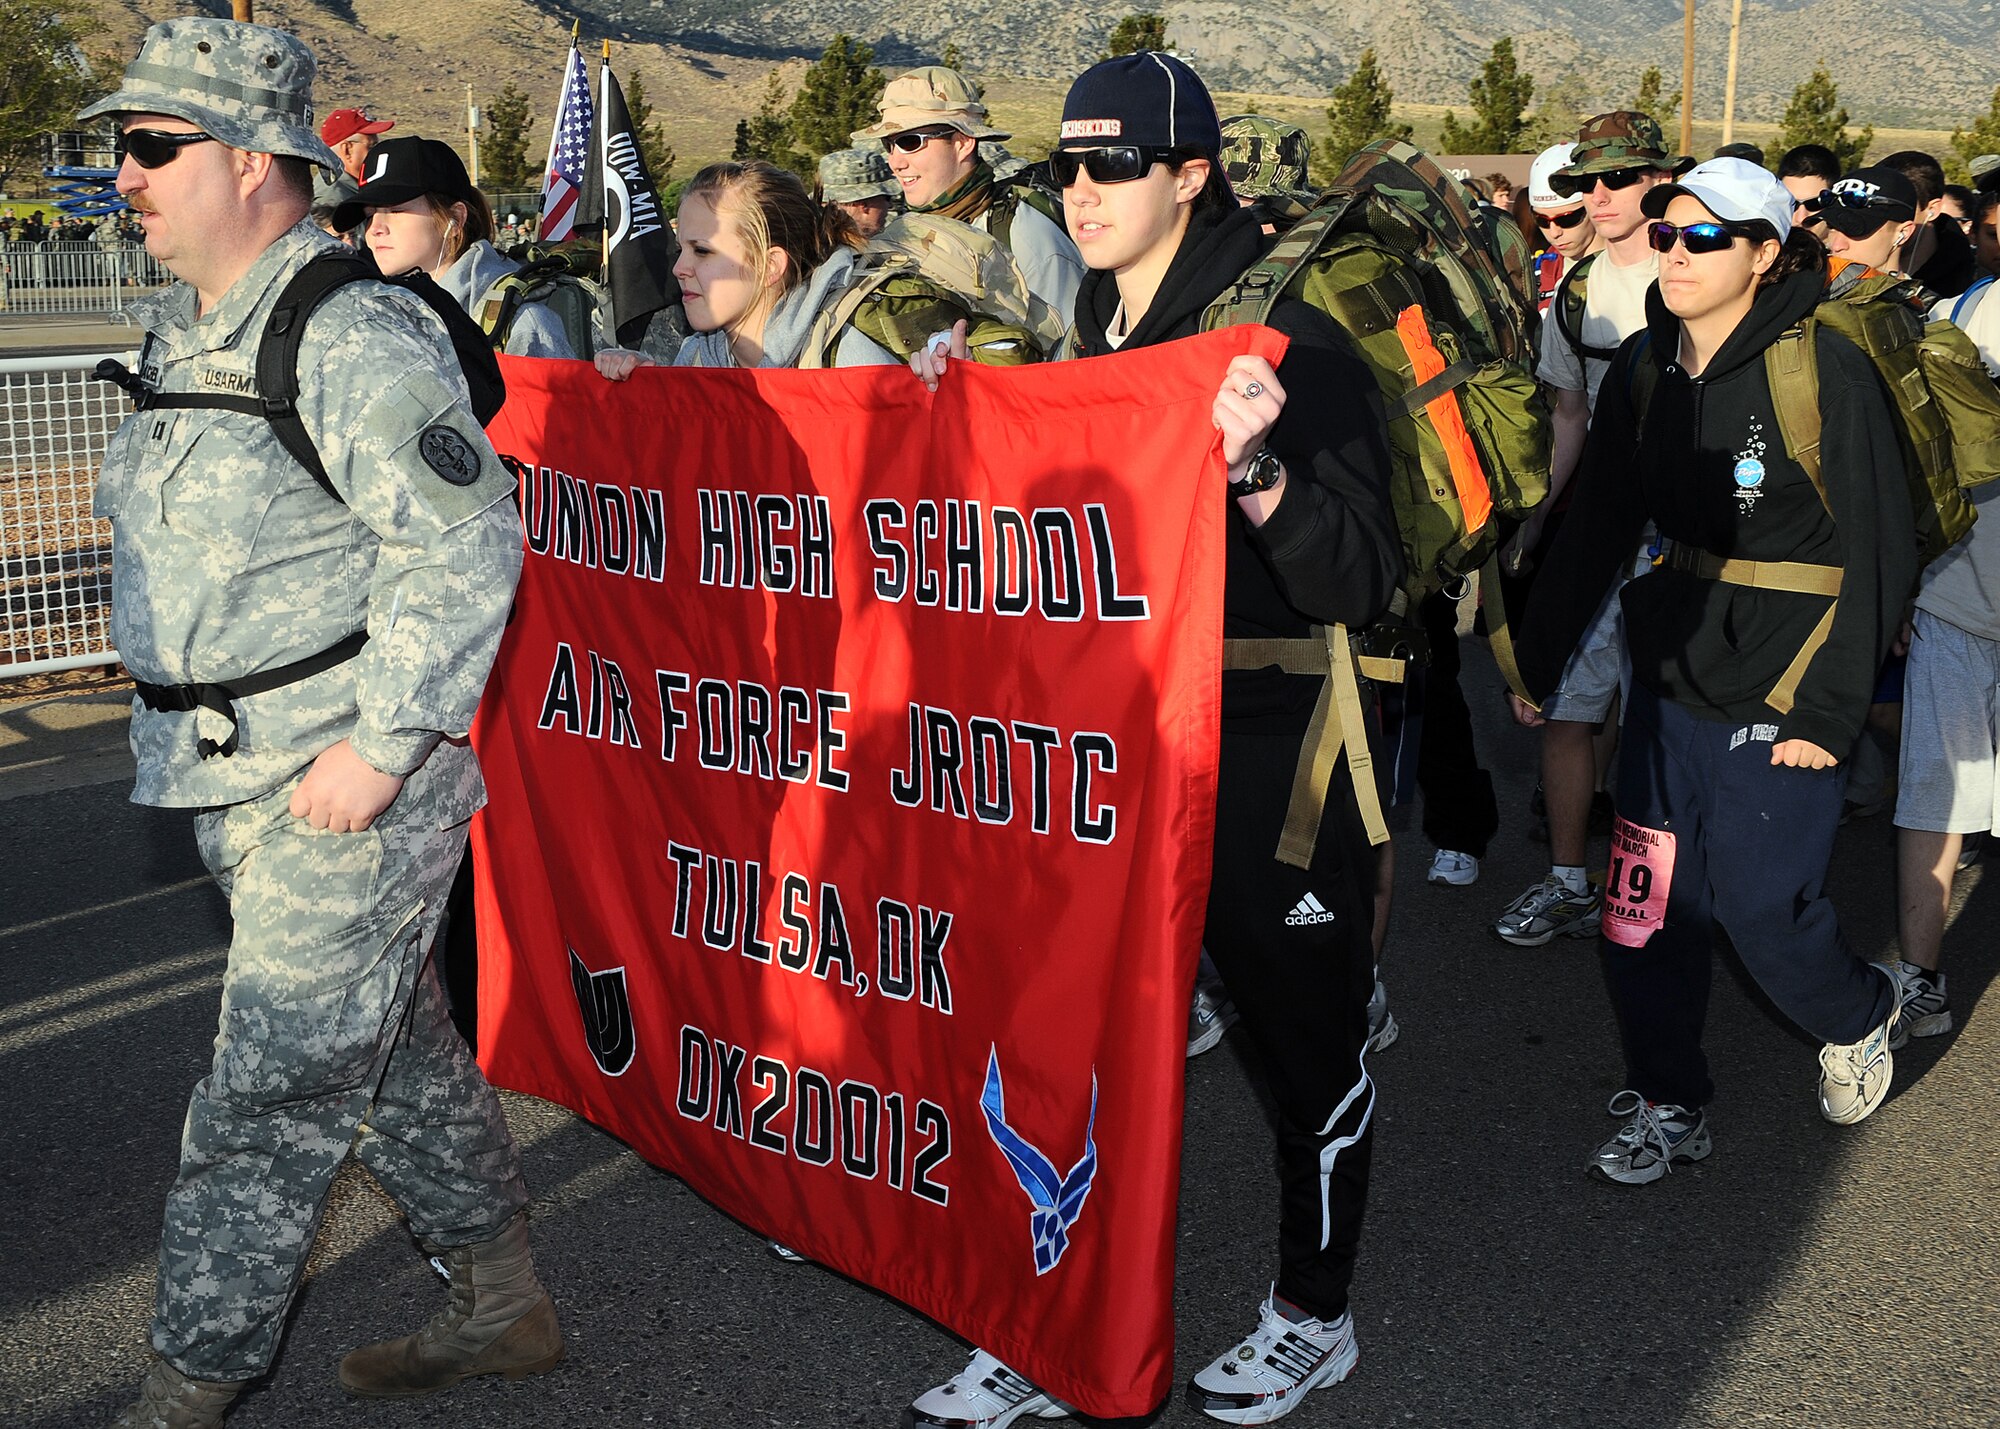 Participants from Union High School JROTC from Tulsa, Okla, show thier bannar proudly at the 20th Annual Bataan Memorial Death March at White Sands Missle Range, N.M., March 29. The march honors a special group of World War II heroes who were responsible for the defense of the islands of Luzon, Corregidor and the harbor defense forts of the Philippines. (U.S. Air Force photo/ Airman 1st Class DeAndre Curtiss)